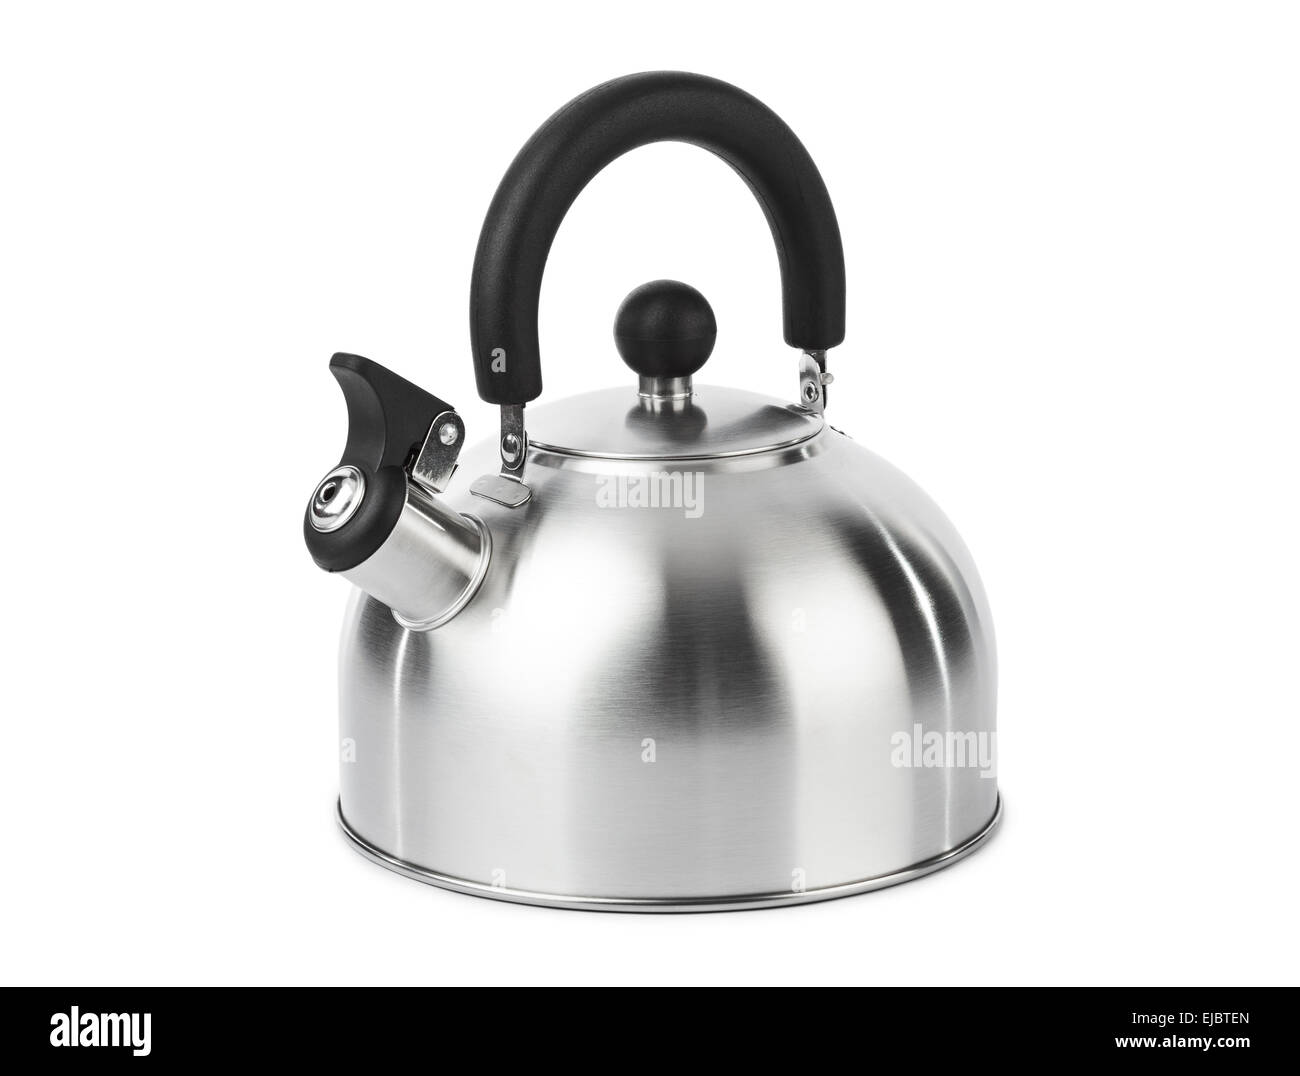 Stovetop whistling kettle Stock Photo